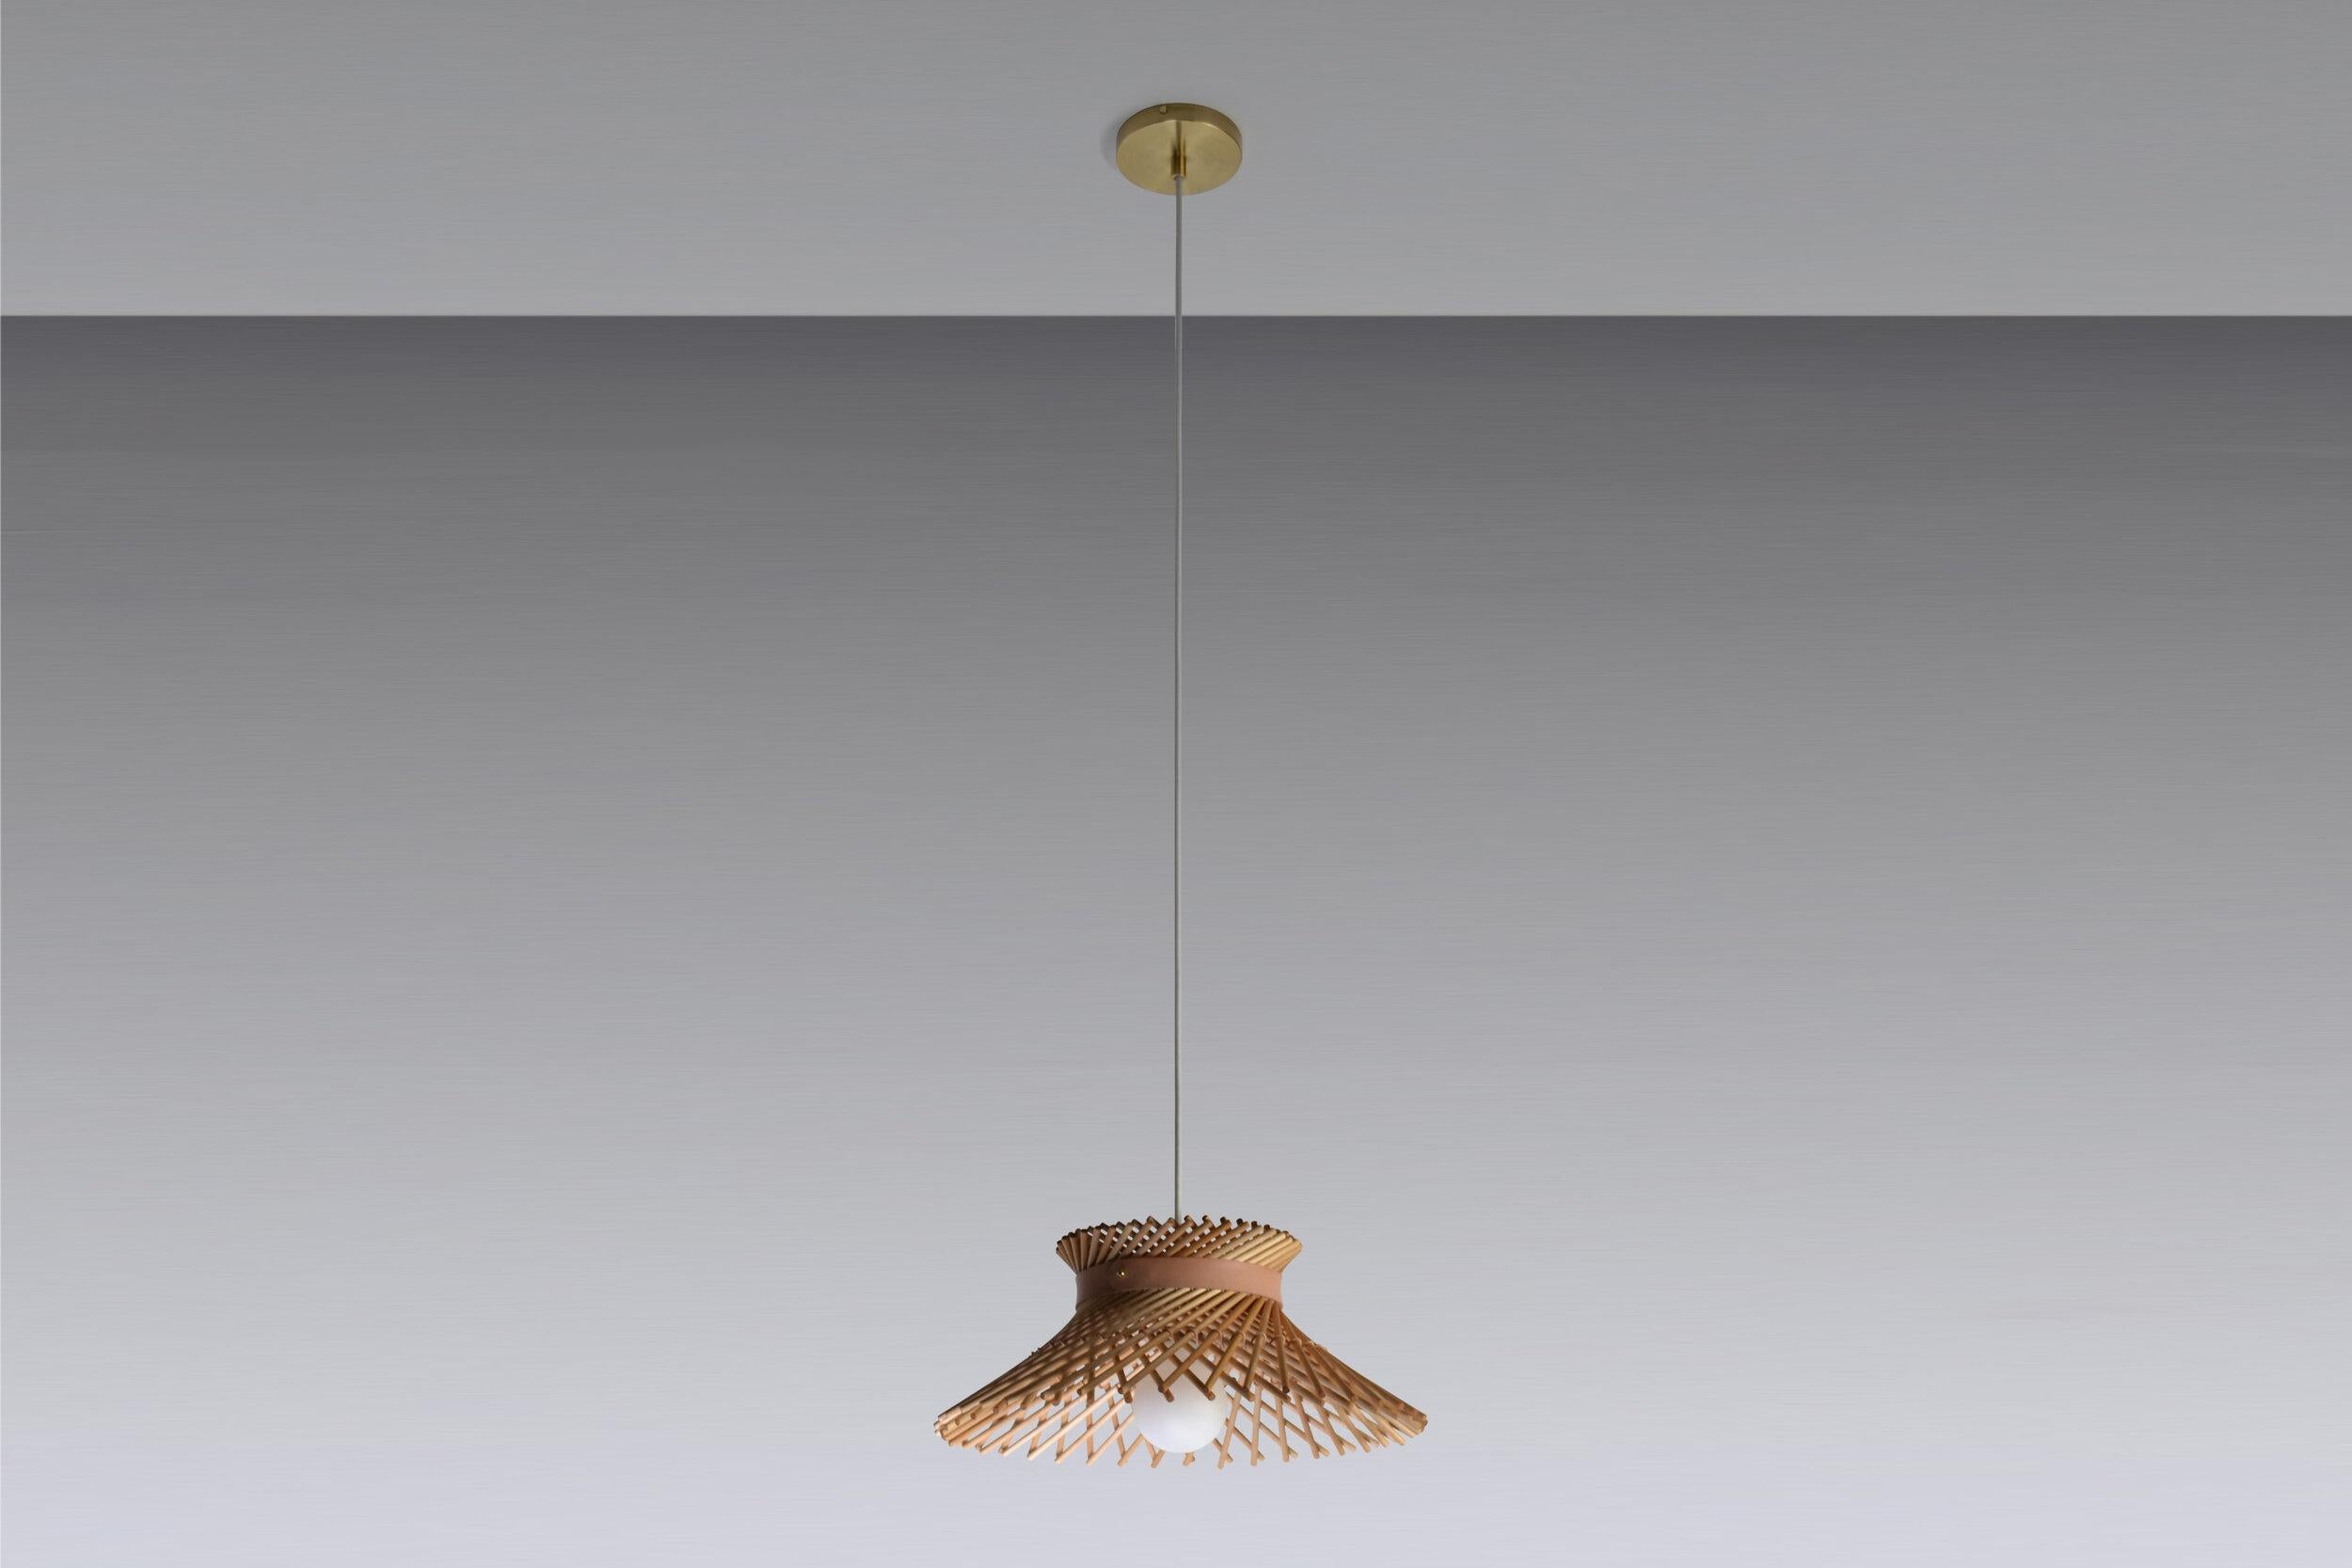 Hand-Crafted Mooda Ceiling Pendant Light 6 / Bleached Maple Wood, Mugla White Marble by INDO- For Sale